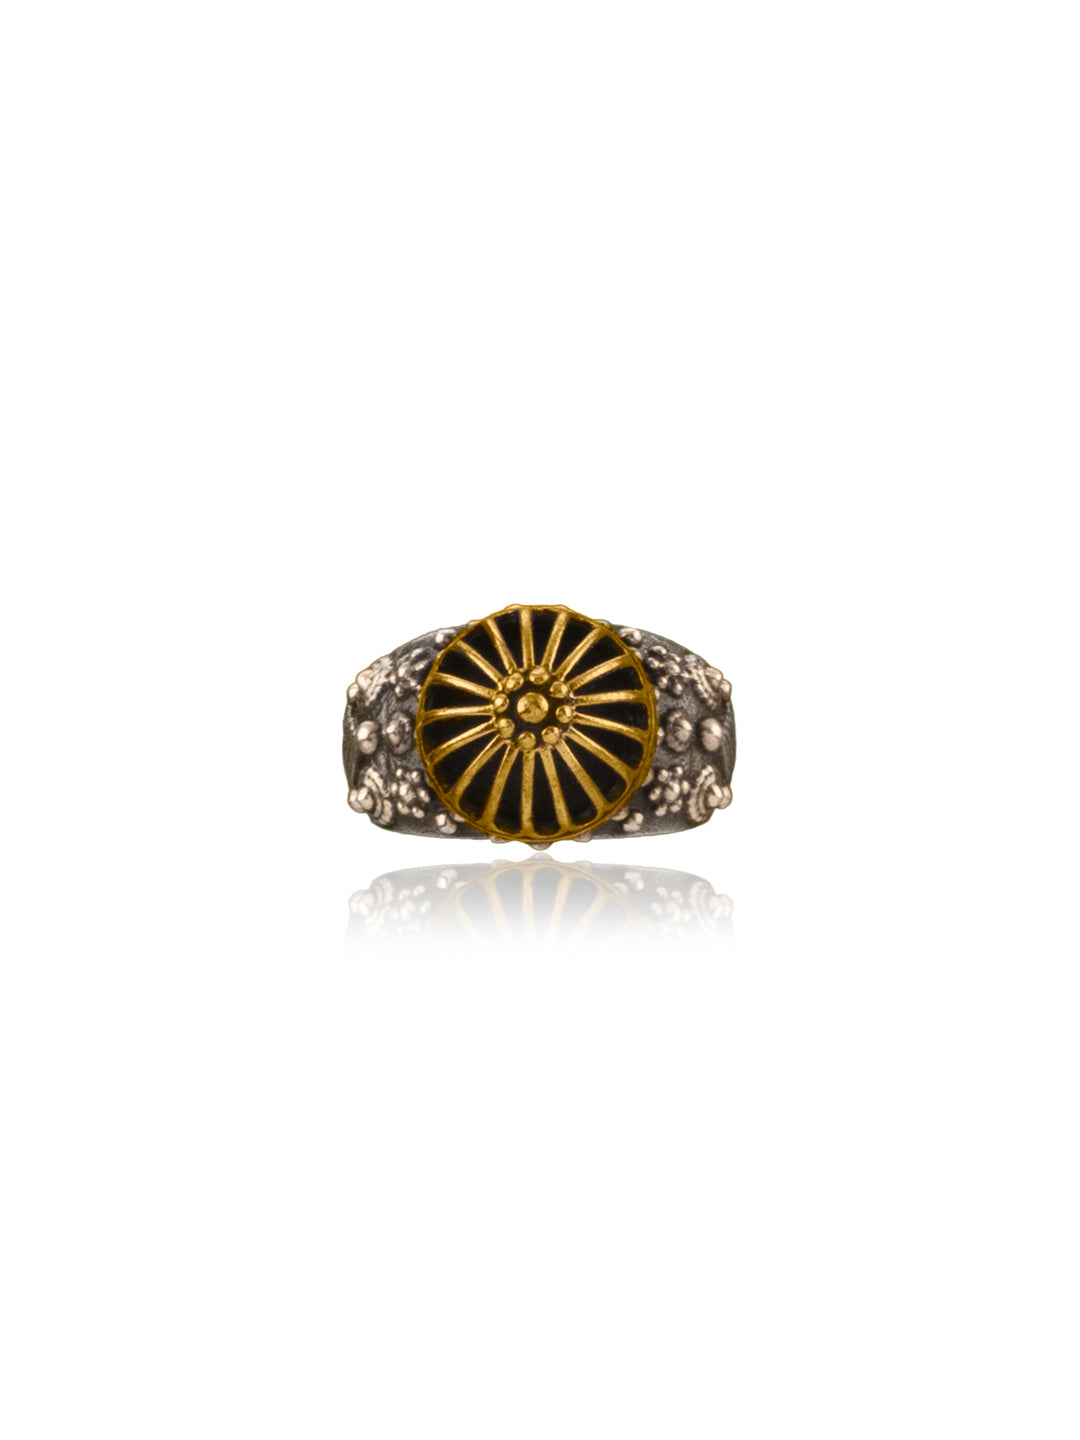 Two Toned Intricate Textured Adjustable Ring